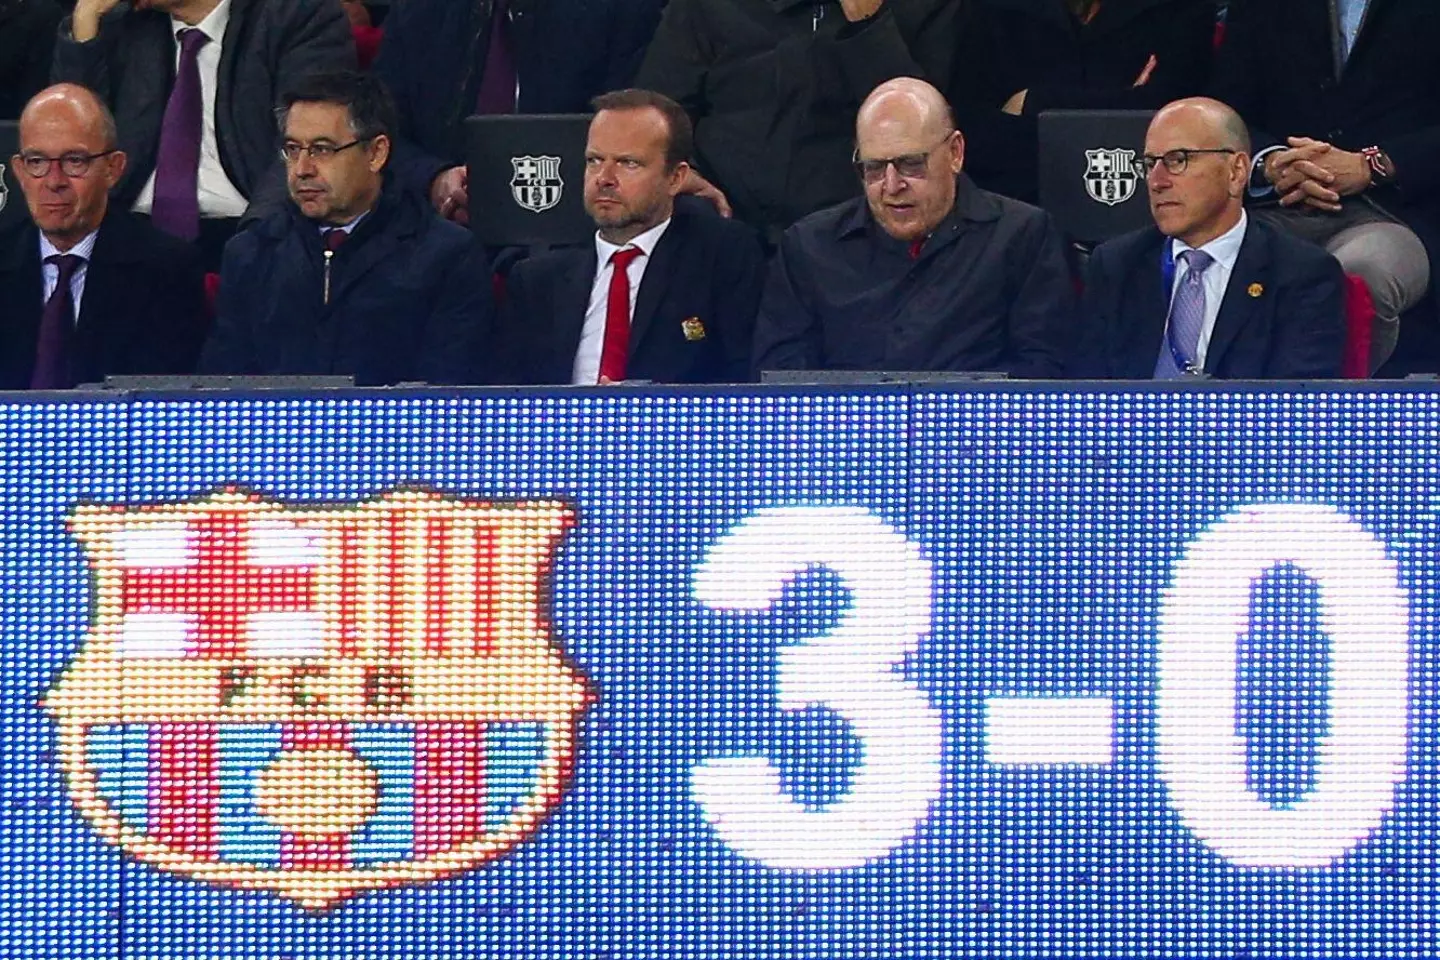 Joel Glazer, Avram Glazer and former CEO Ed Woodward watch on as Manchester United are beaten by Barcelona in 2019. (Alamy)